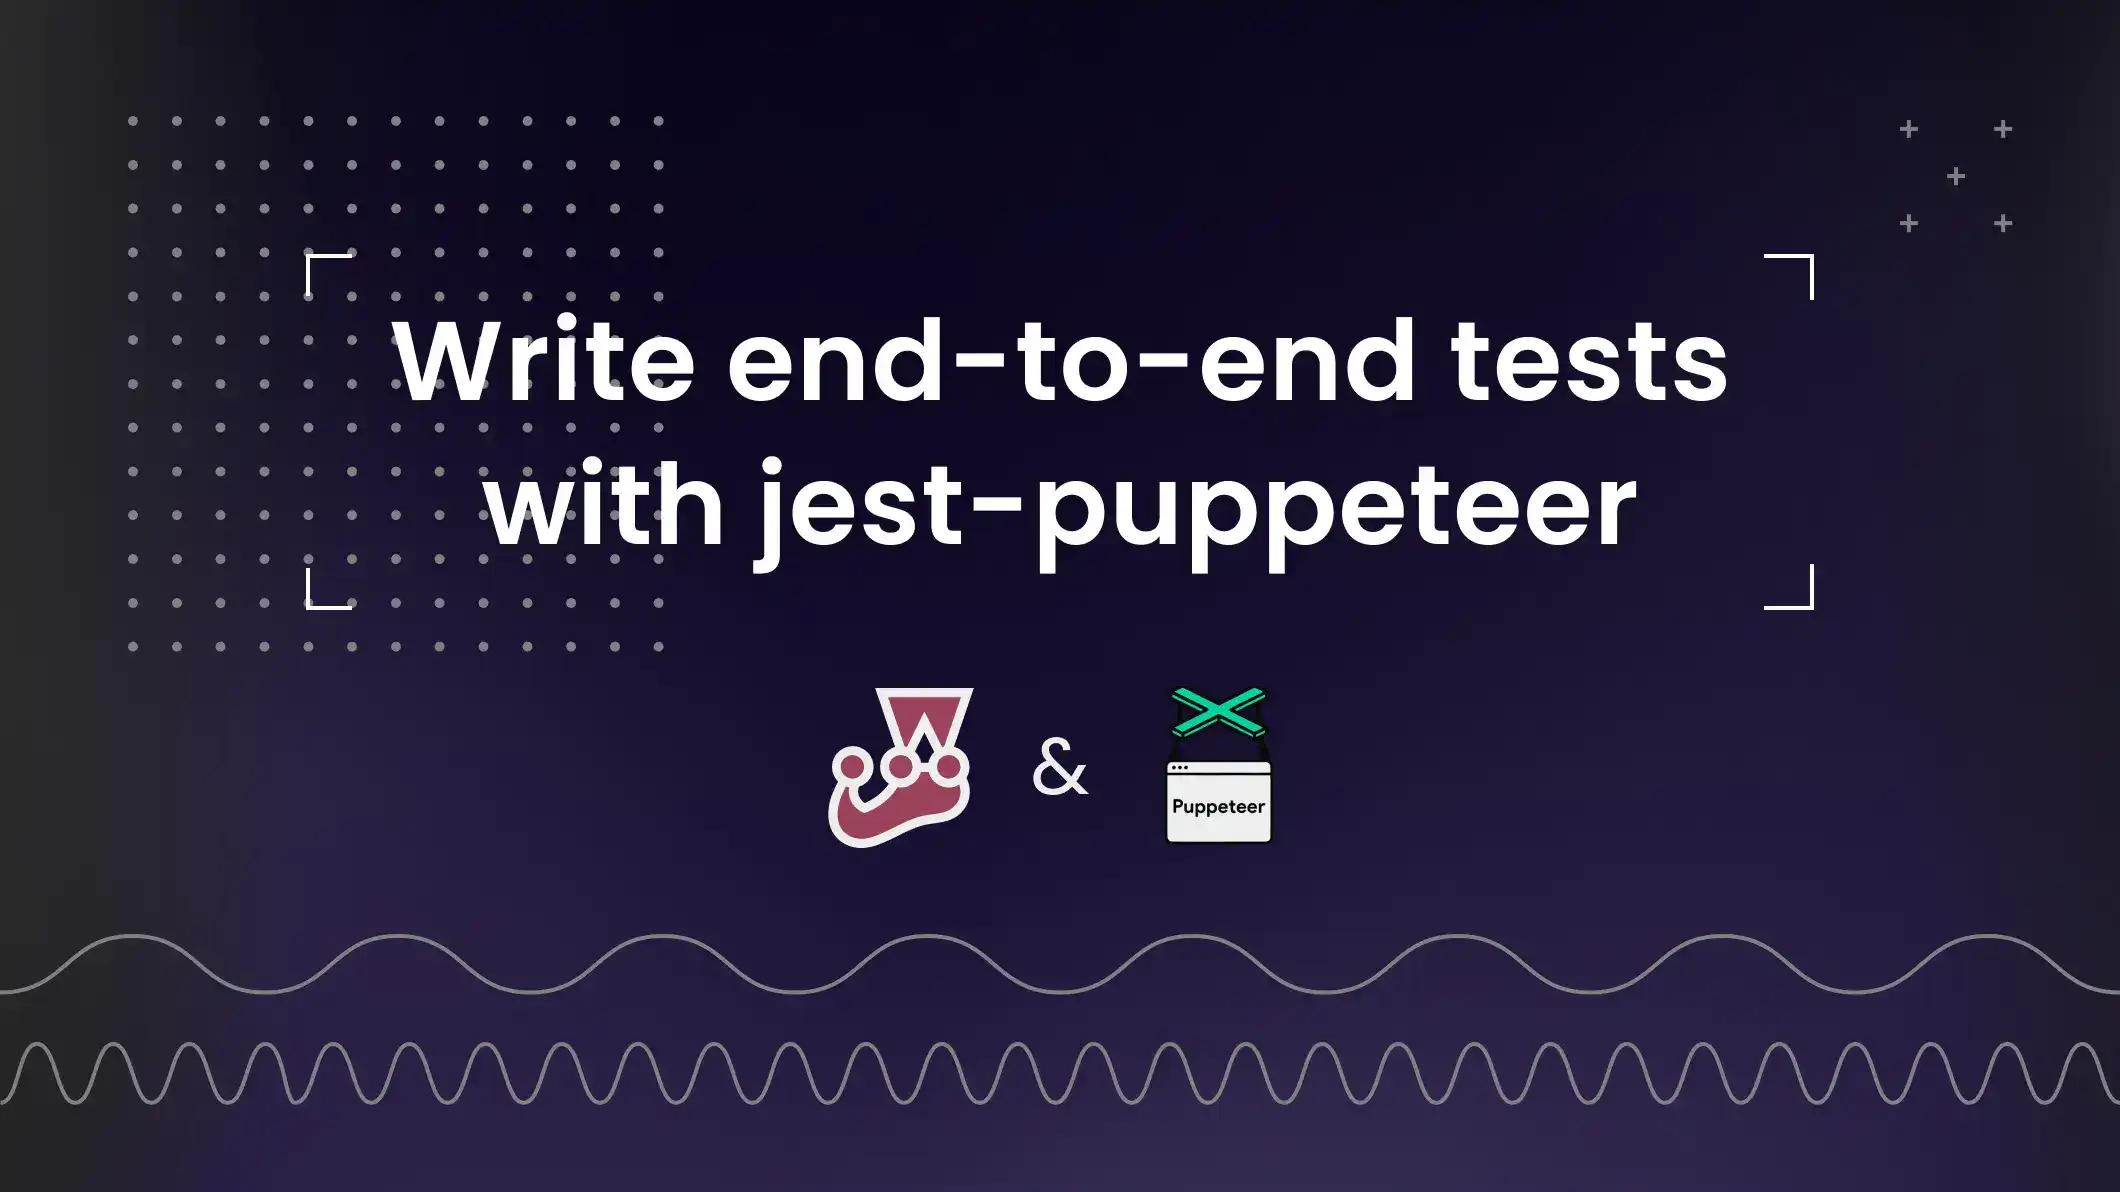 A quick guide to writing end-to-end tests with jest-puppeteer